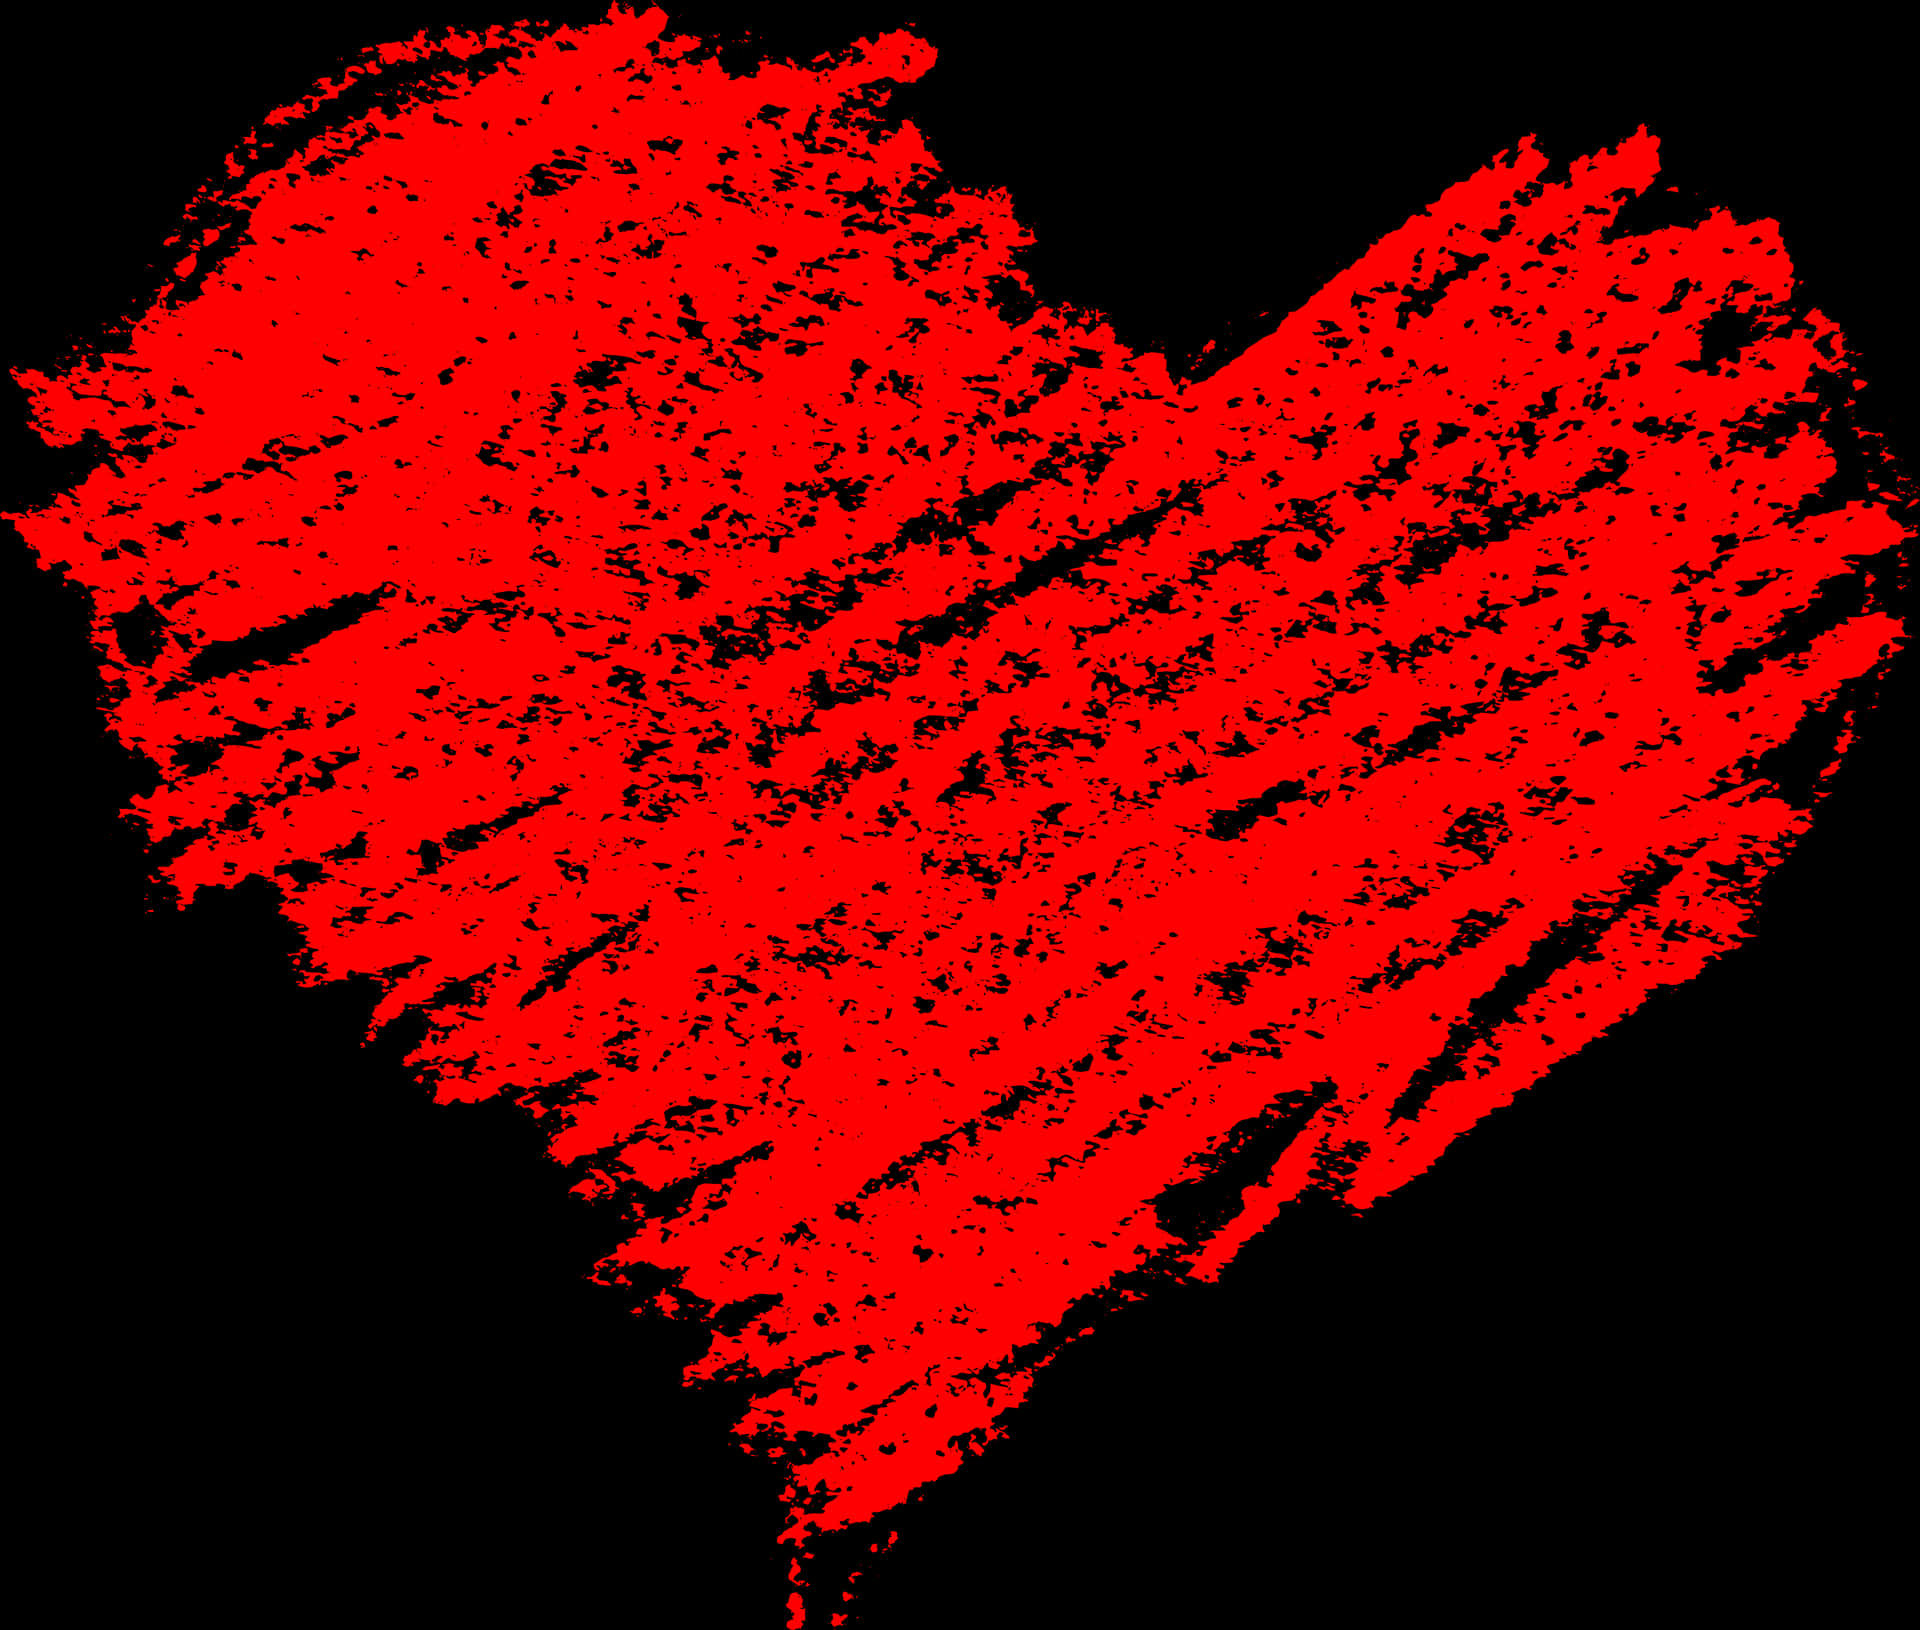 Red Grungy Heart Texture PNG